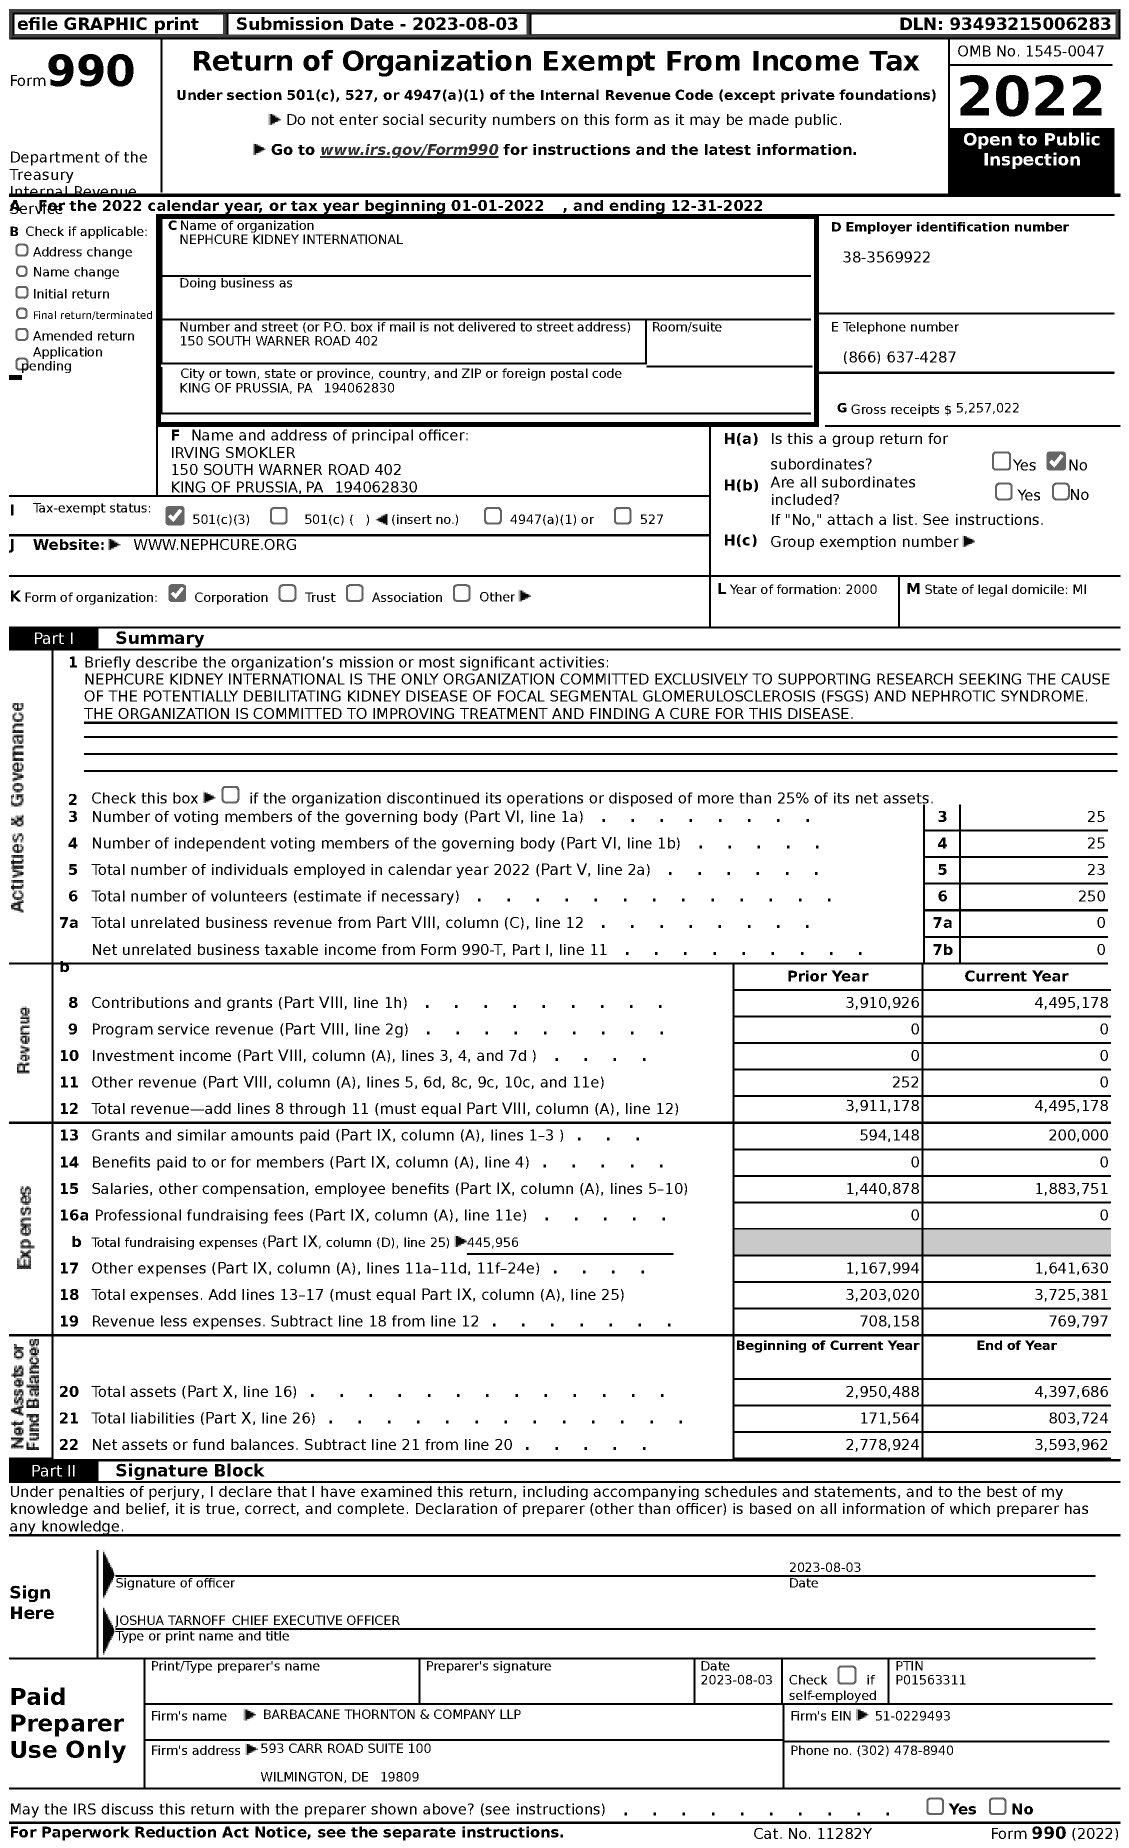 Image of first page of 2022 Form 990 for Nephcure Kidney International (NKI)